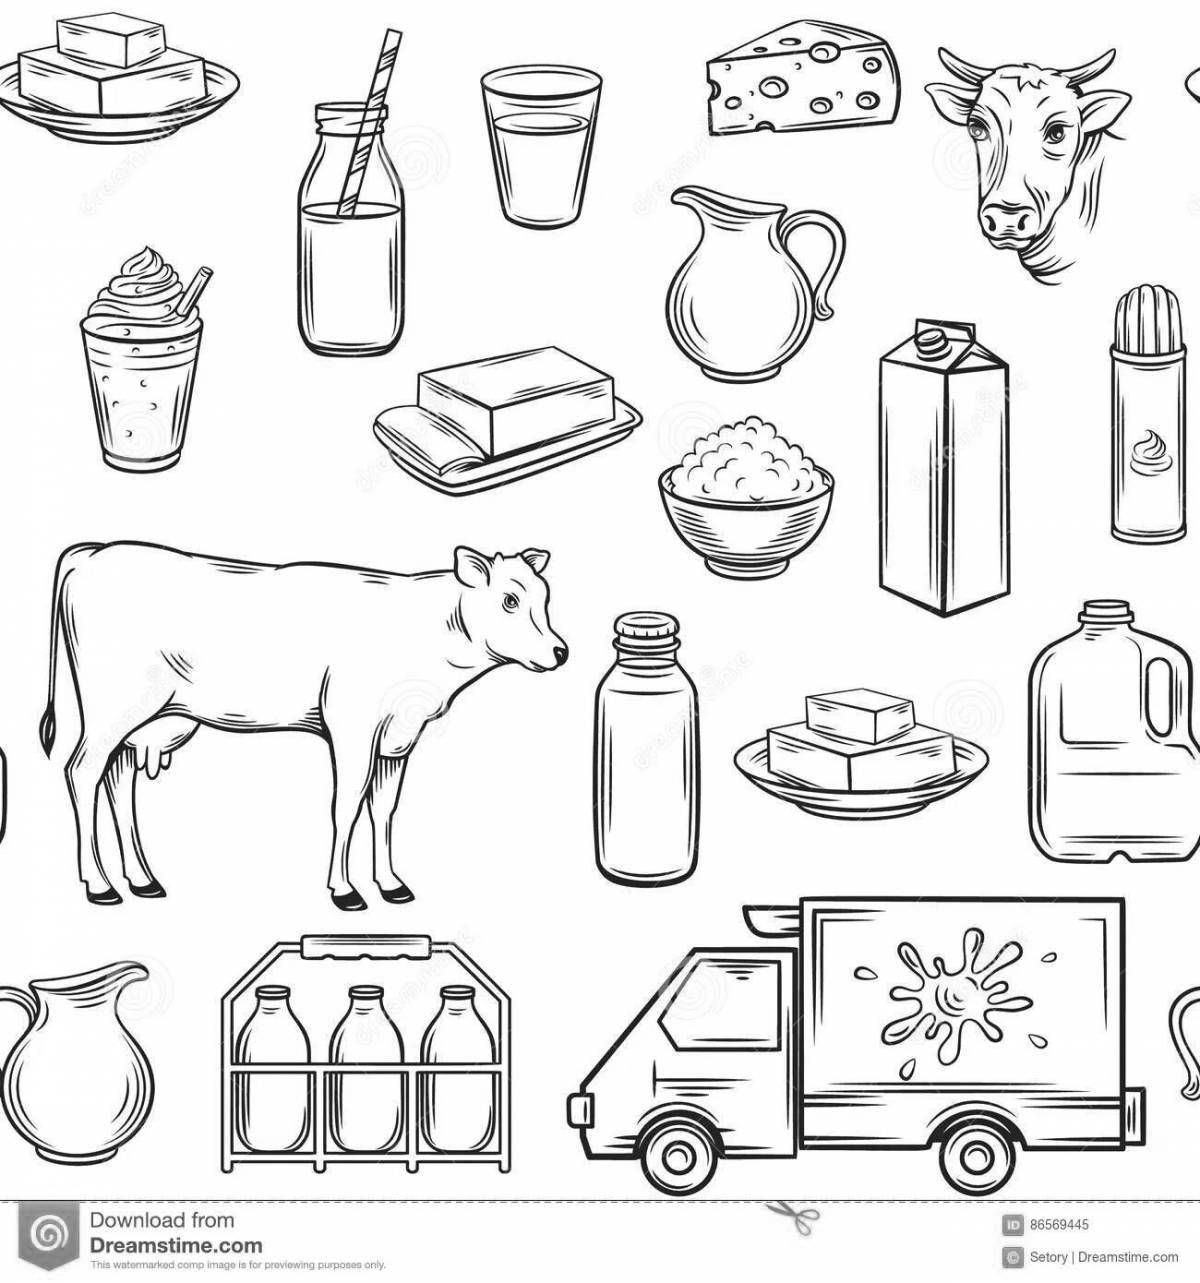 Adorable dairy coloring book for kids